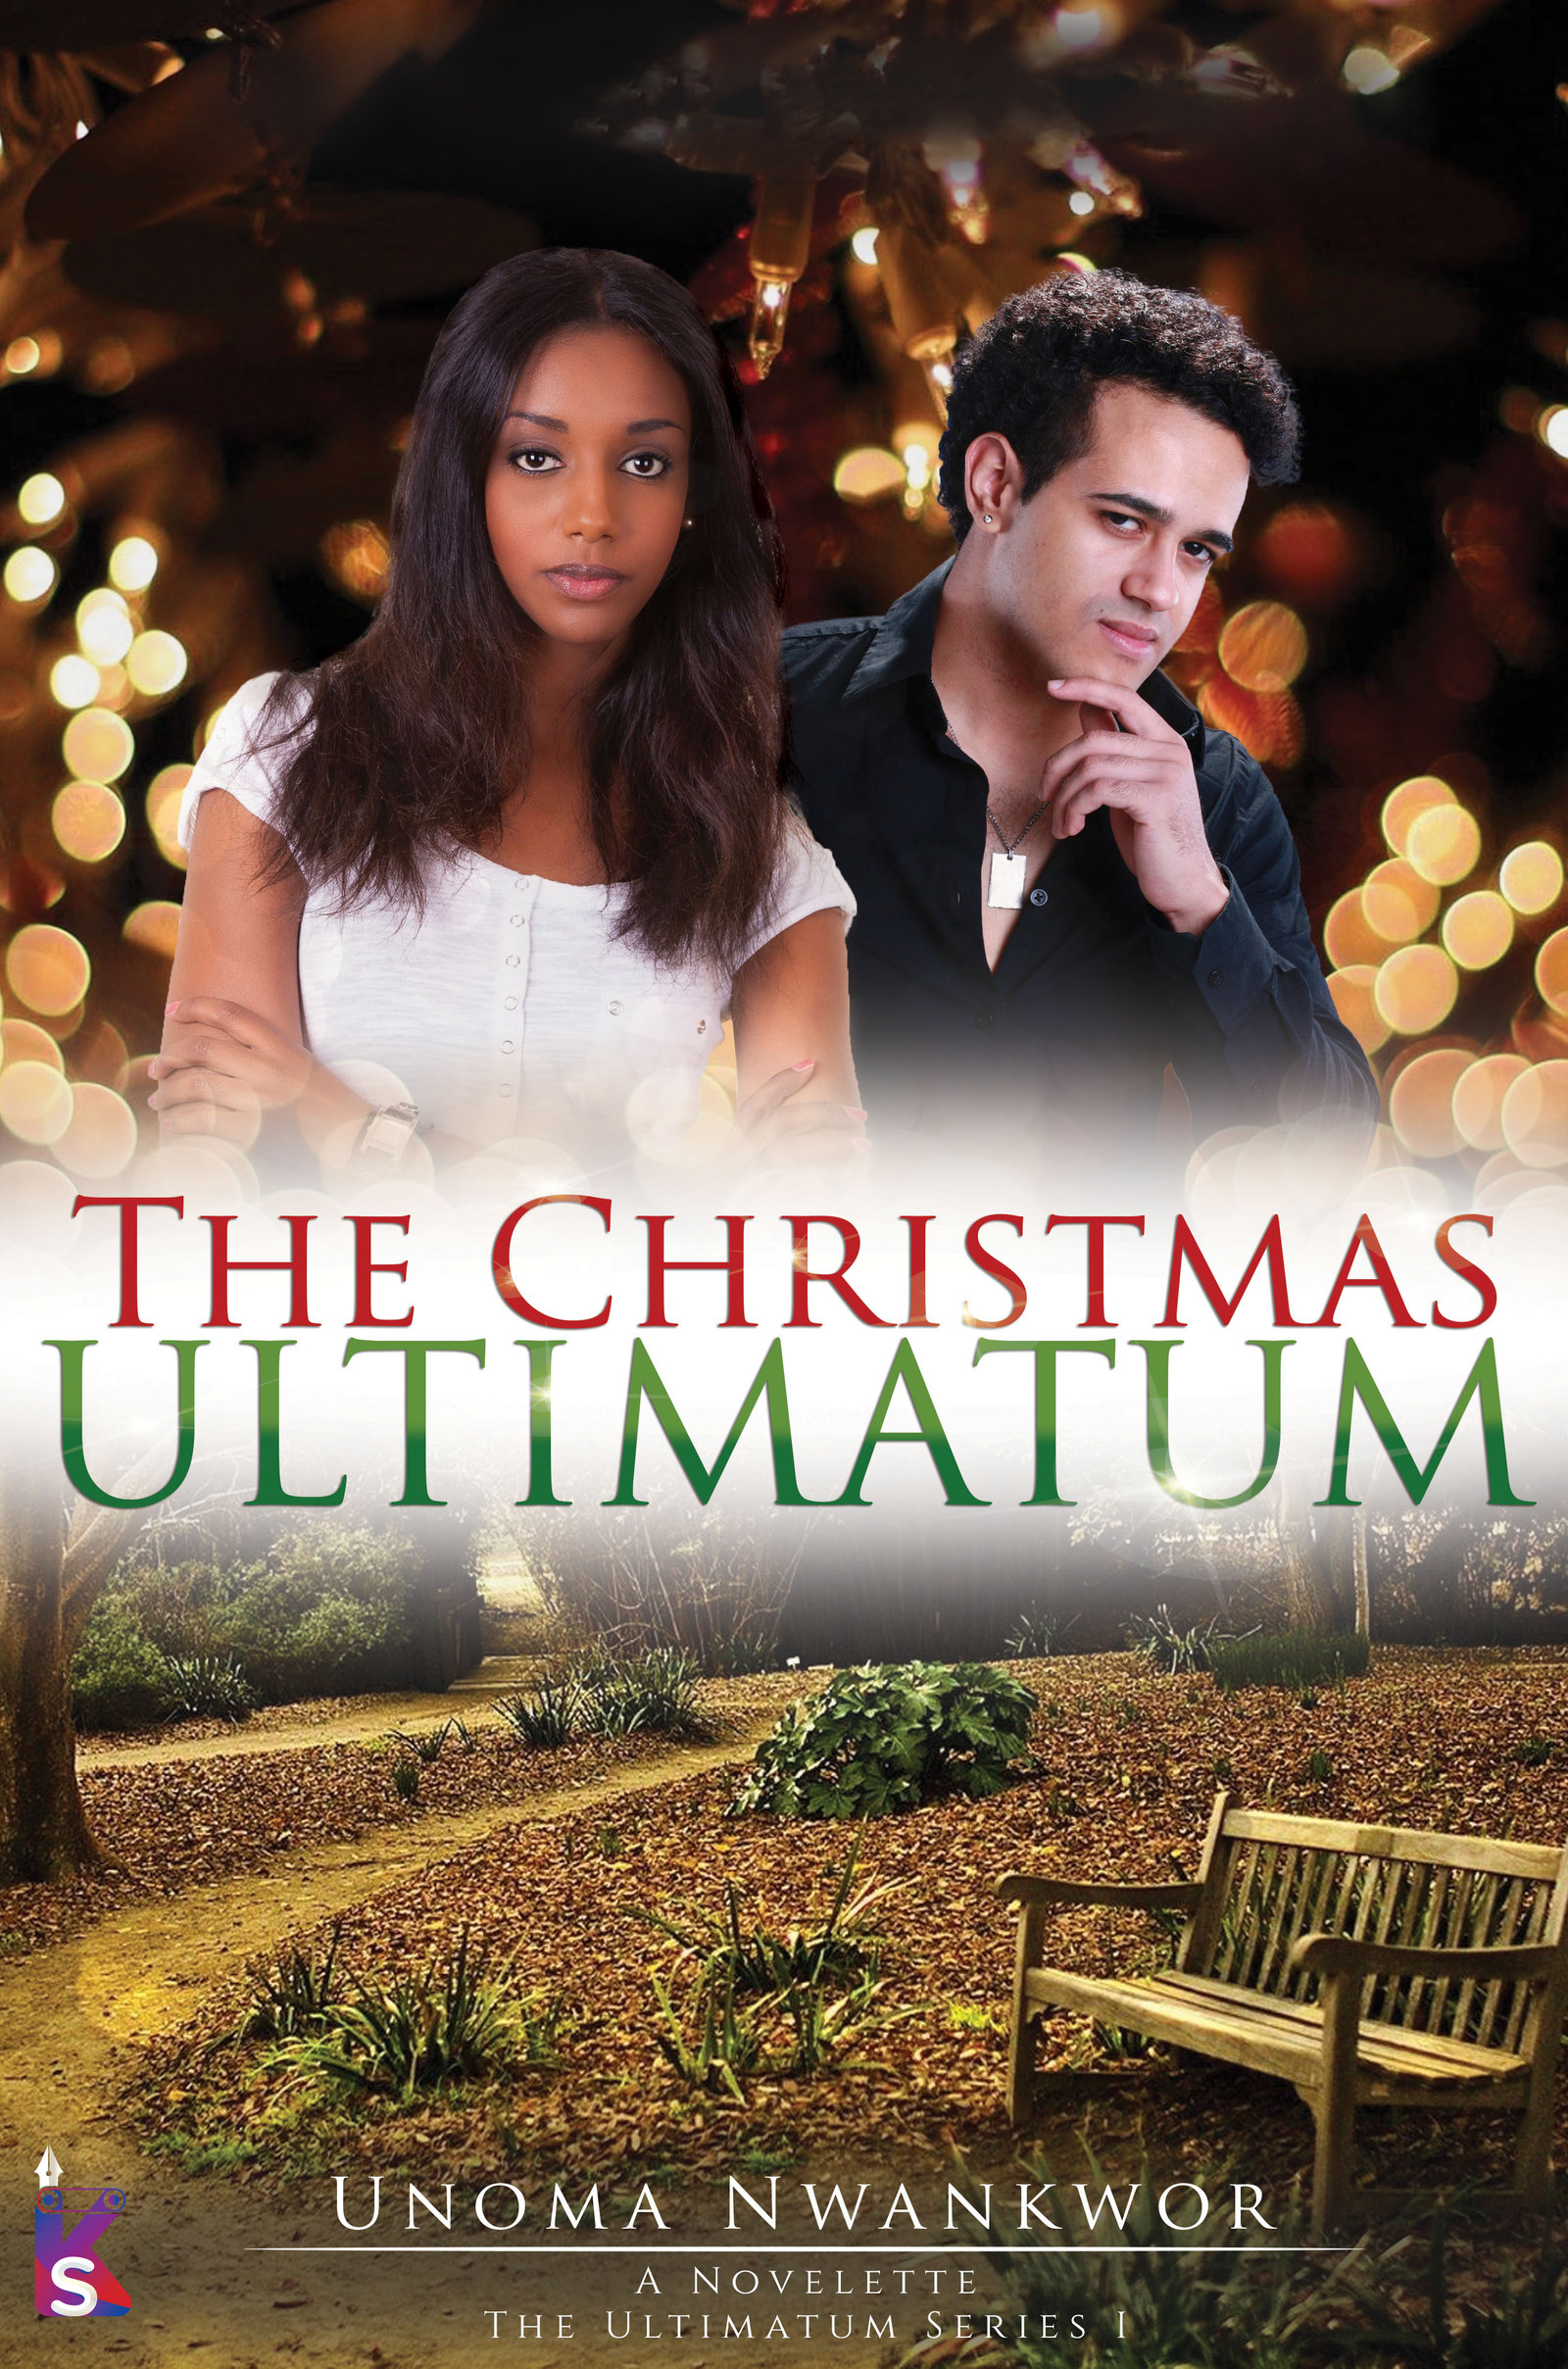 Book cover of the Christmas Ultimatum by Unoma Nwankor